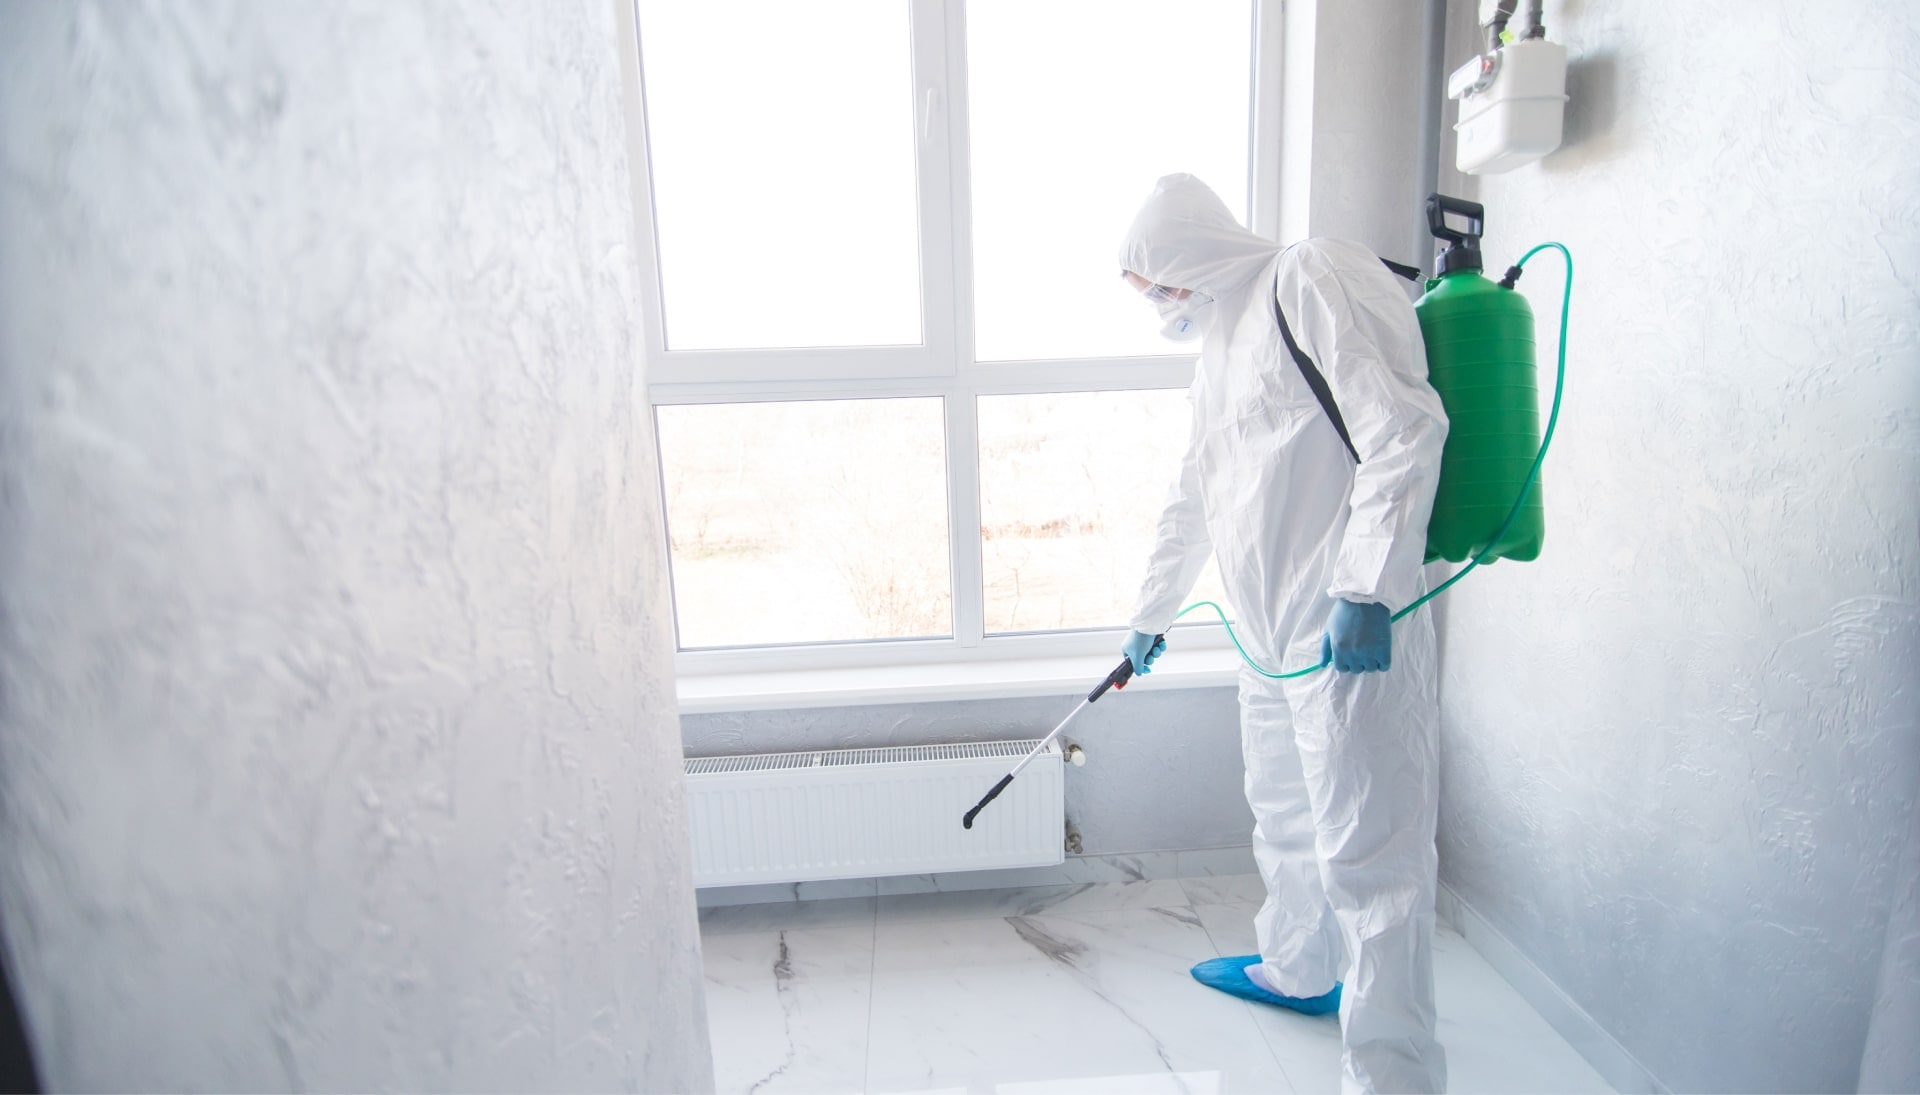 We provide the highest-quality mold inspection, testing, and removal services in the Marietta, Georgia area.